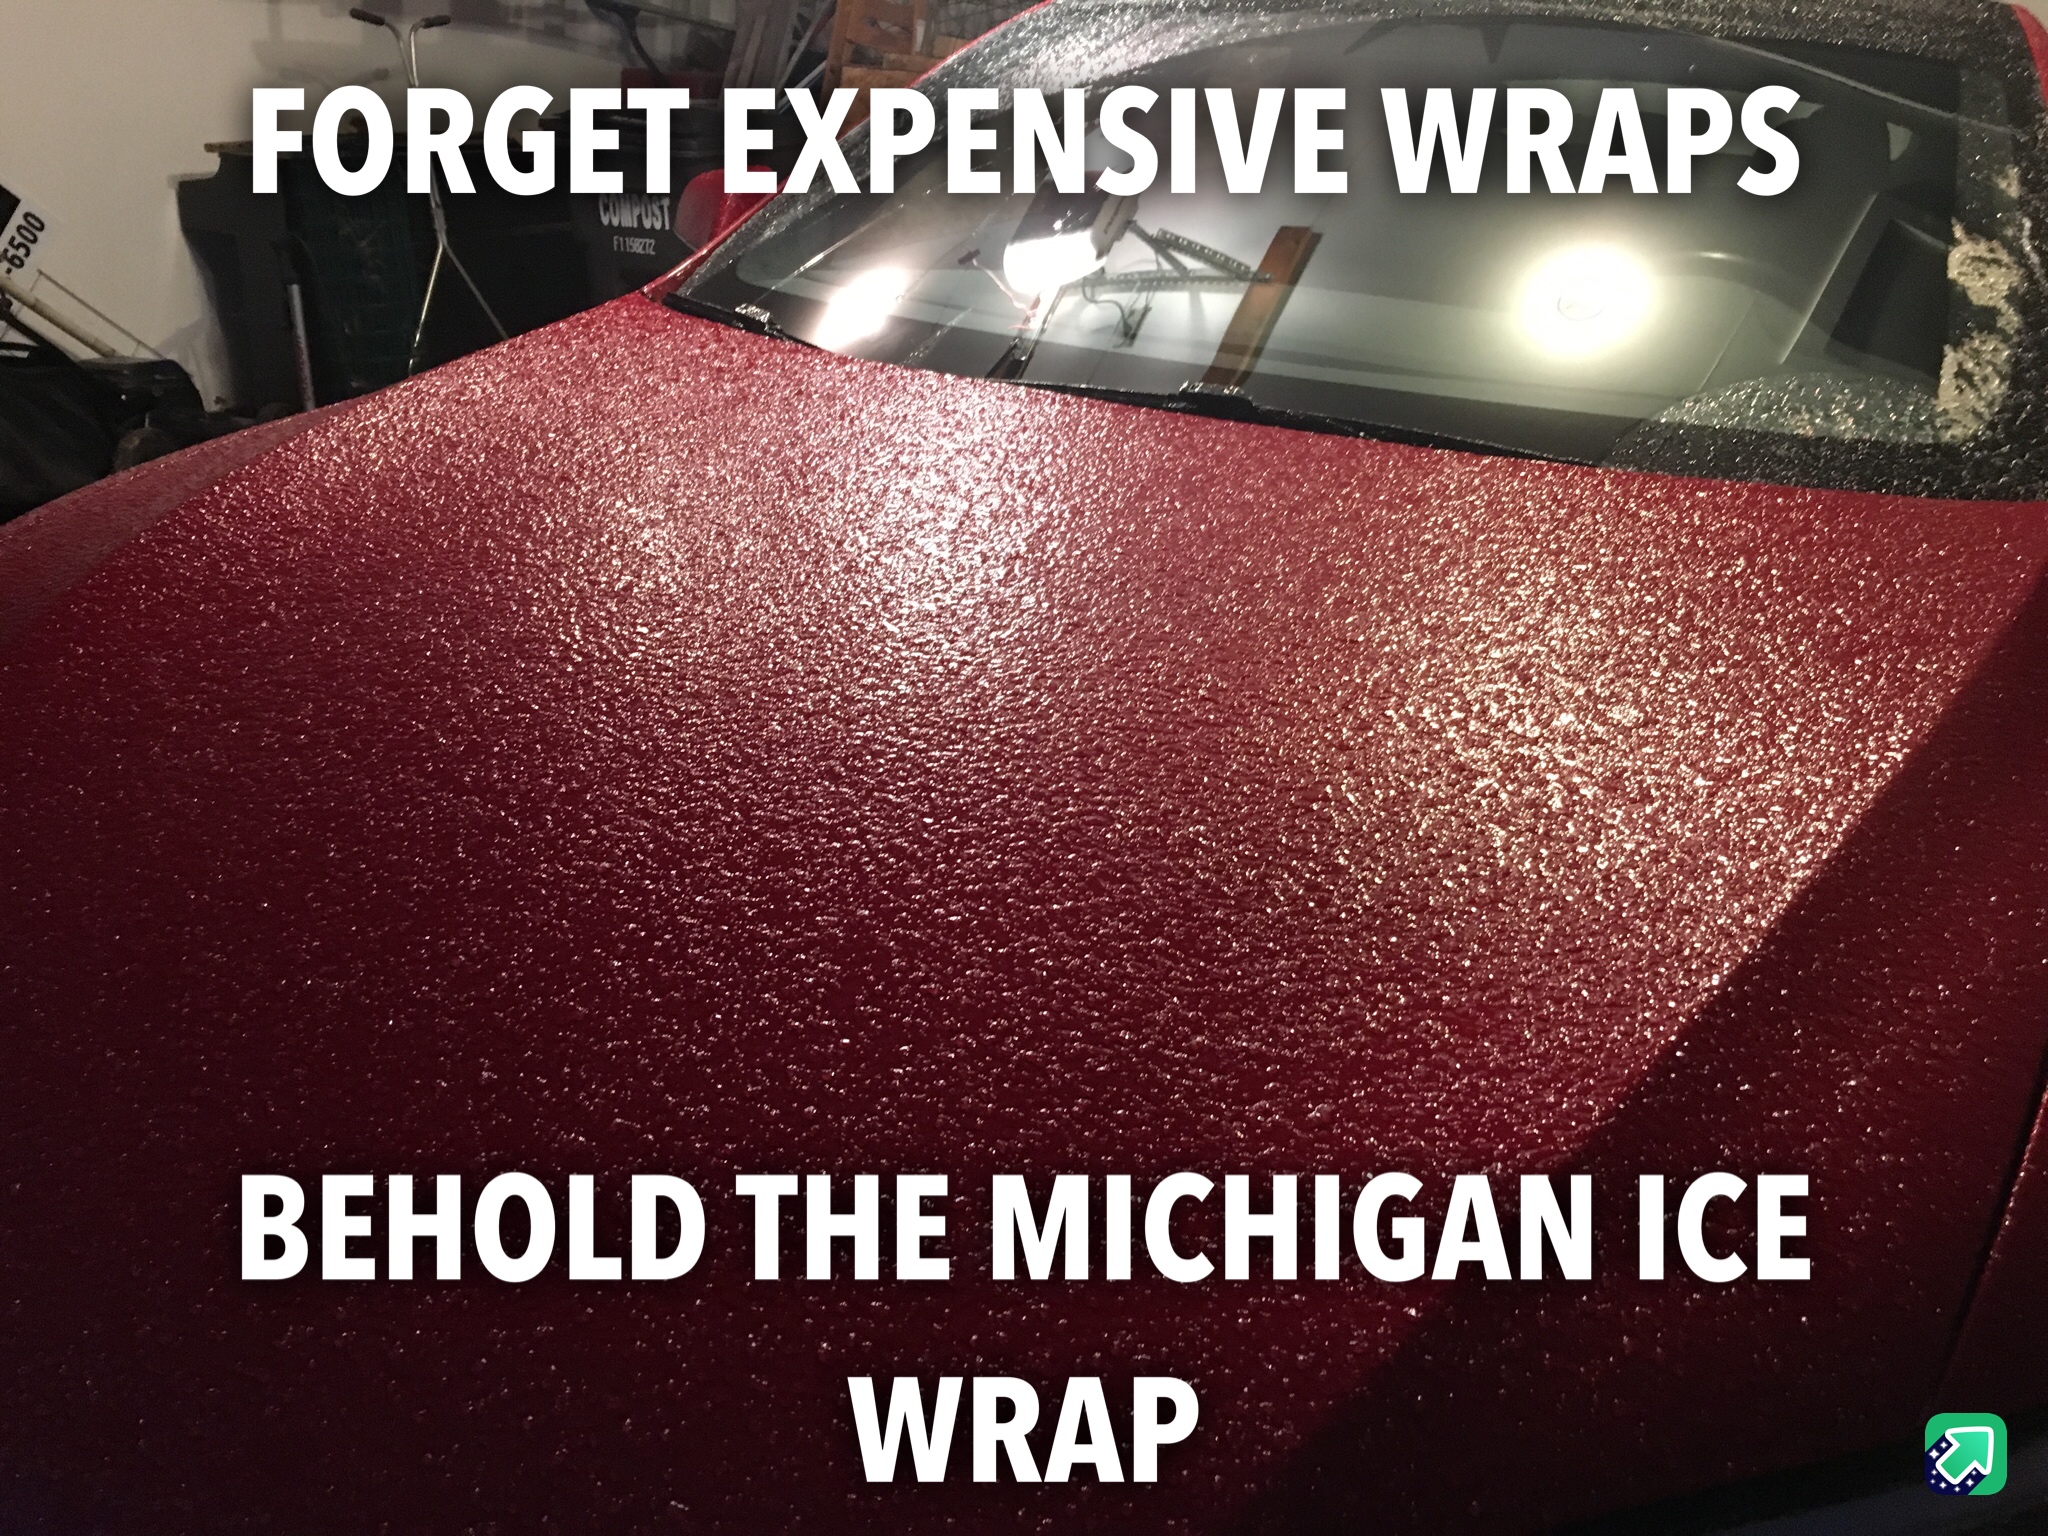 memes - car - Forget Expensive Wraps Behold The Michigan Ice Wrap